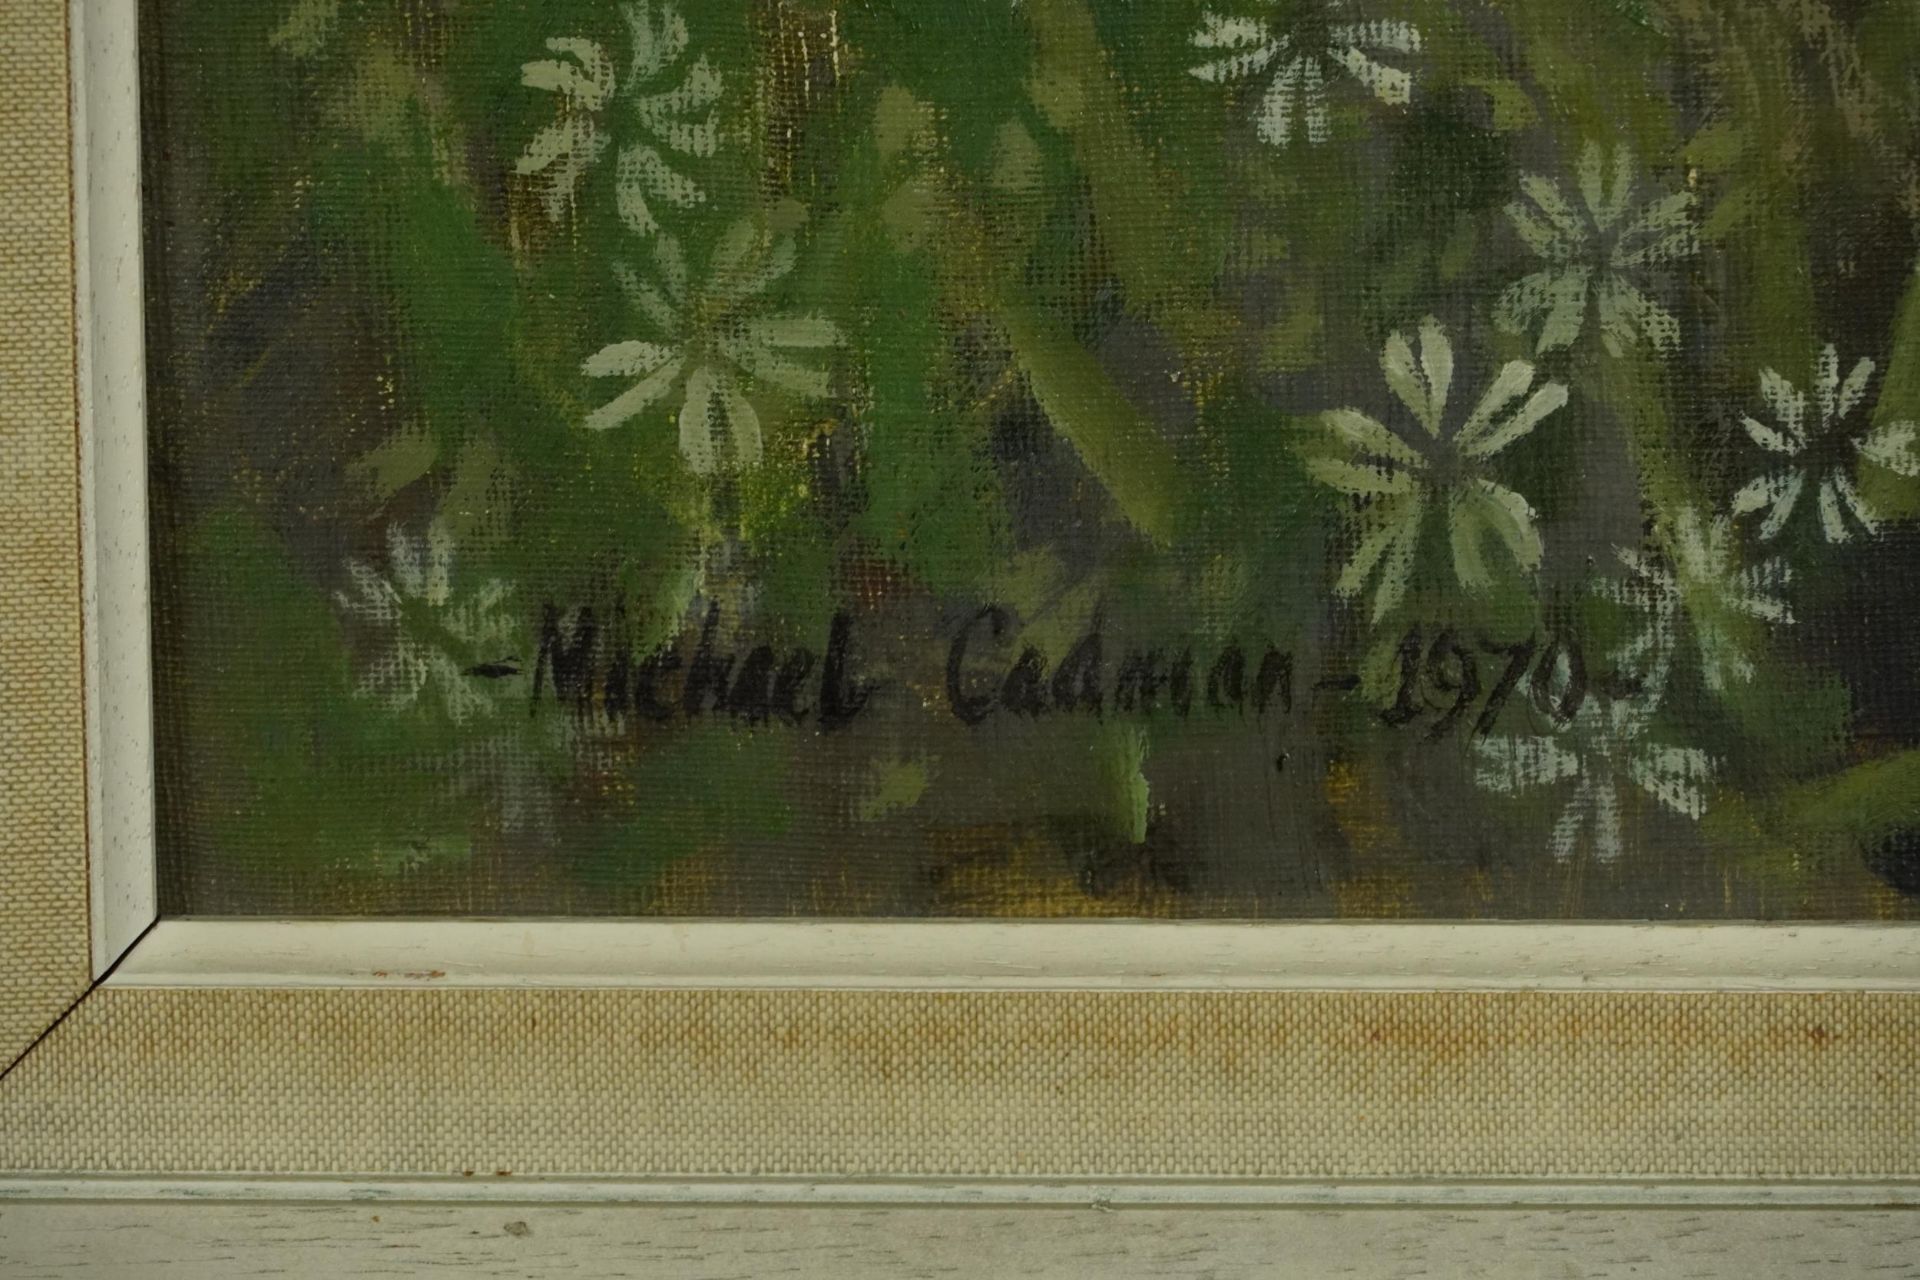 Michael Cadman 1970 - Field of Hemlock, oil on board, mounted and framed, 64cm x 44cm excluding - Image 3 of 4